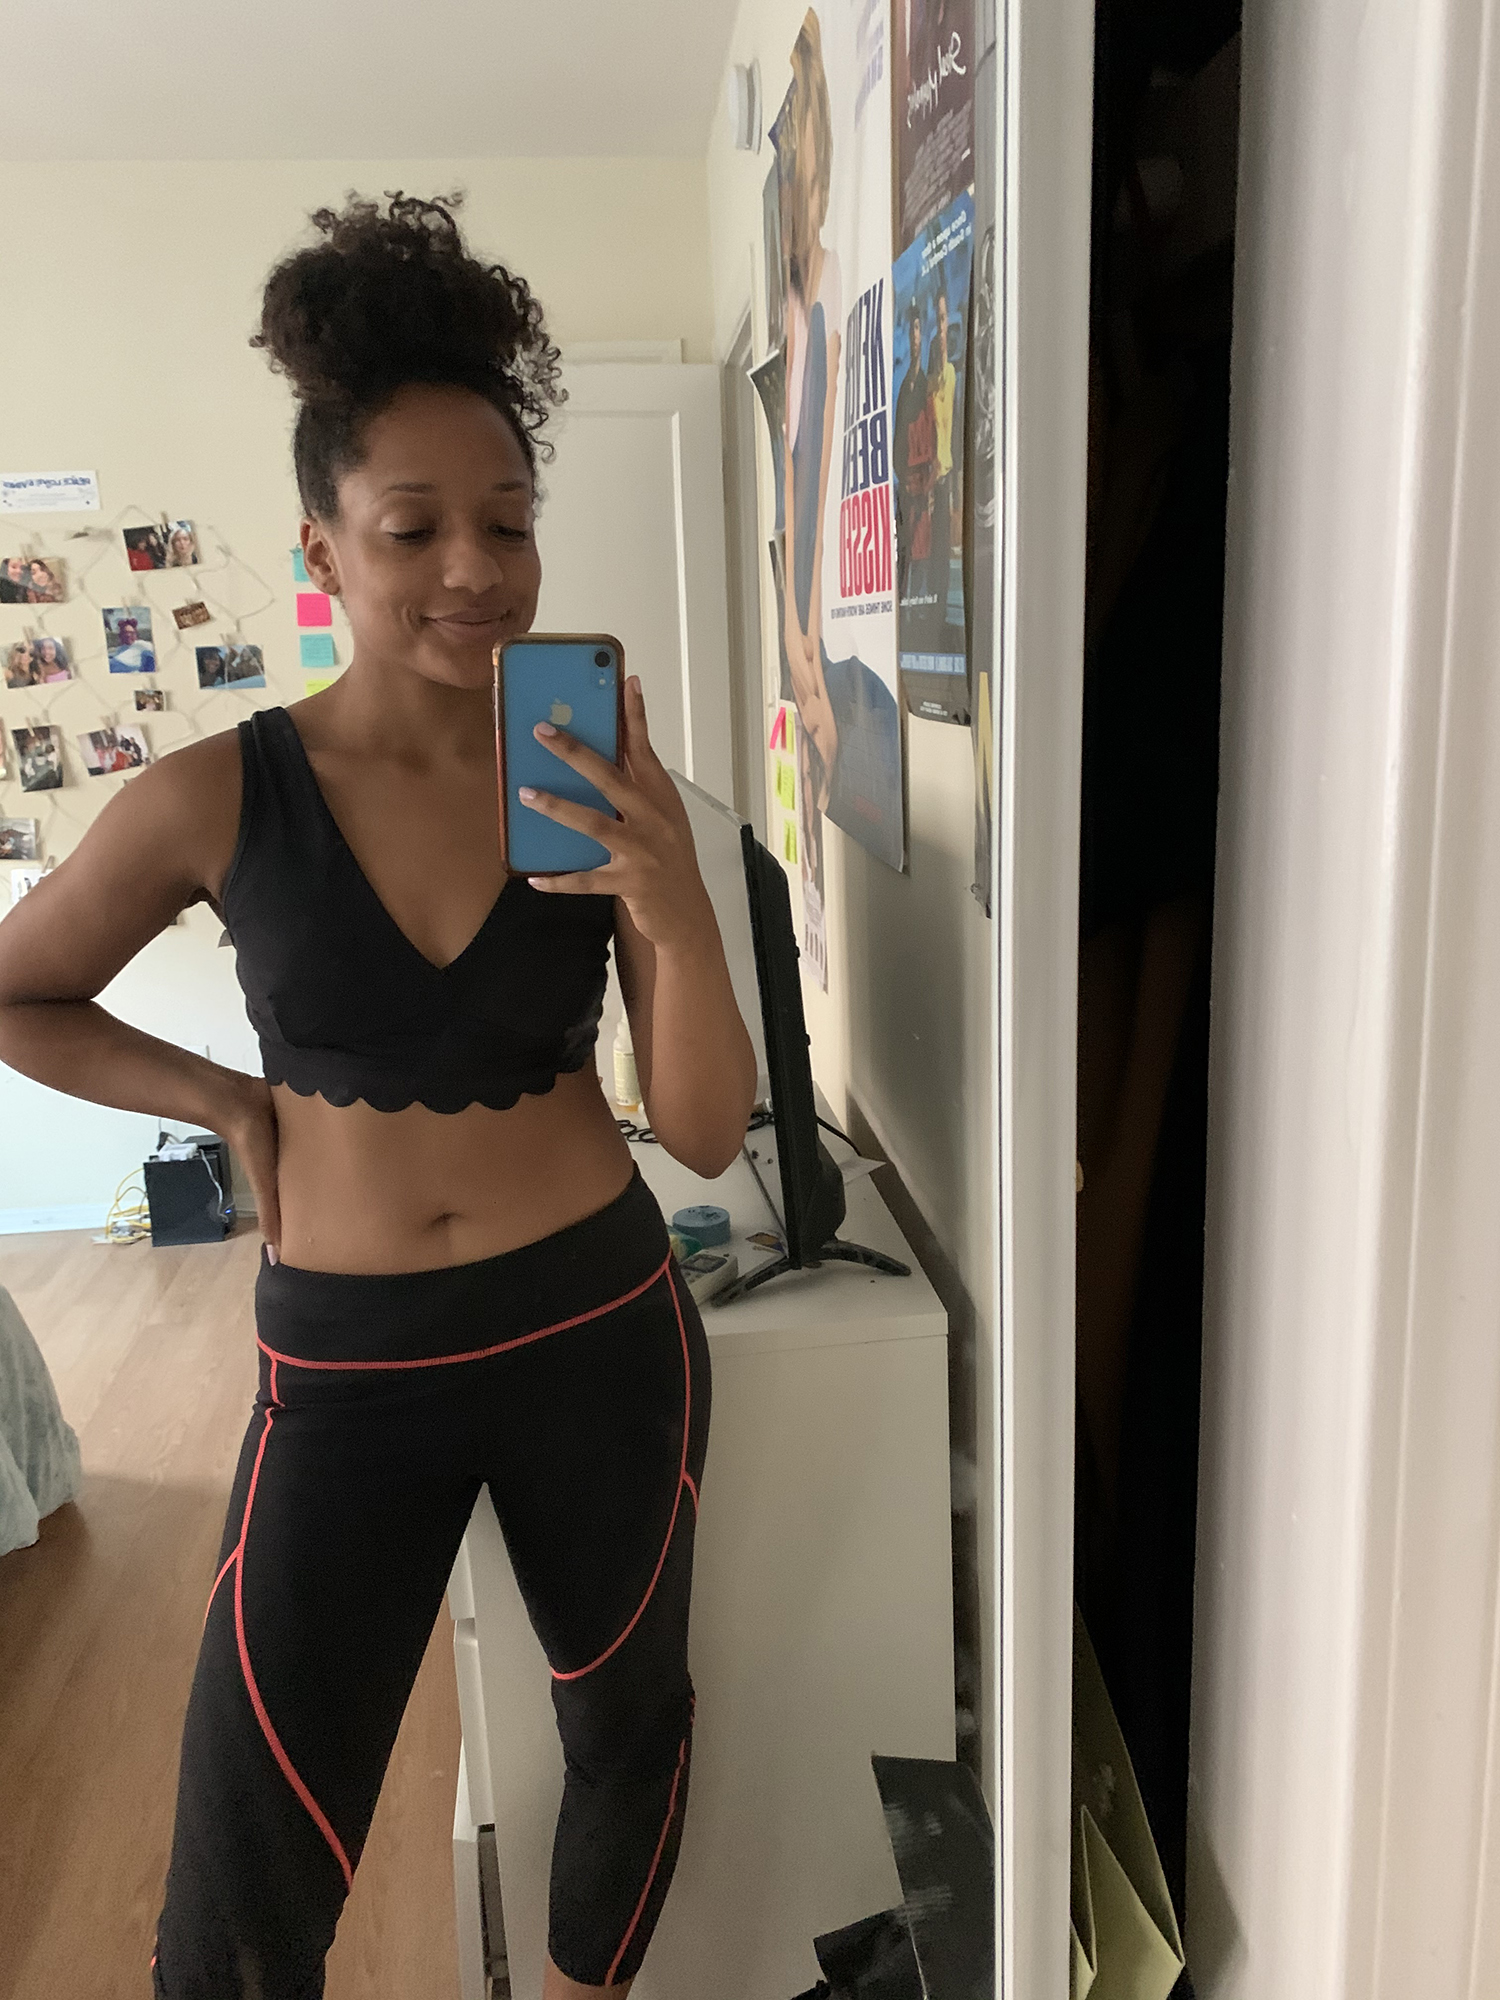 How At-Home Workouts Made Me Rethink Weight Loss